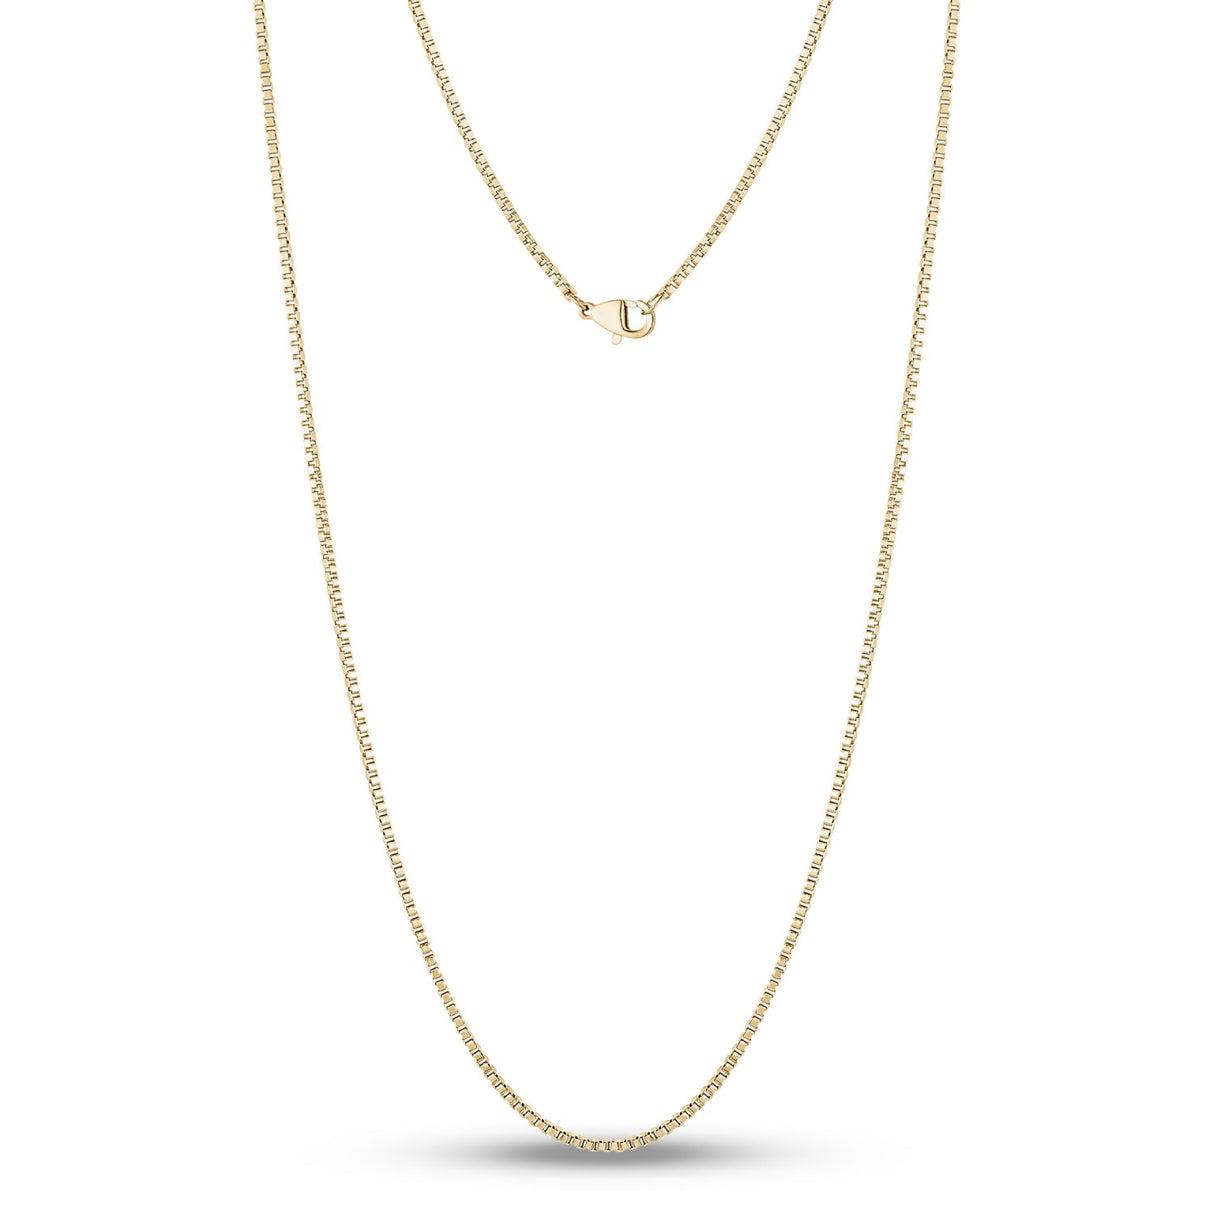 1.5mm Thin Box link Chain - Unisex Necklaces - The Steel Shop